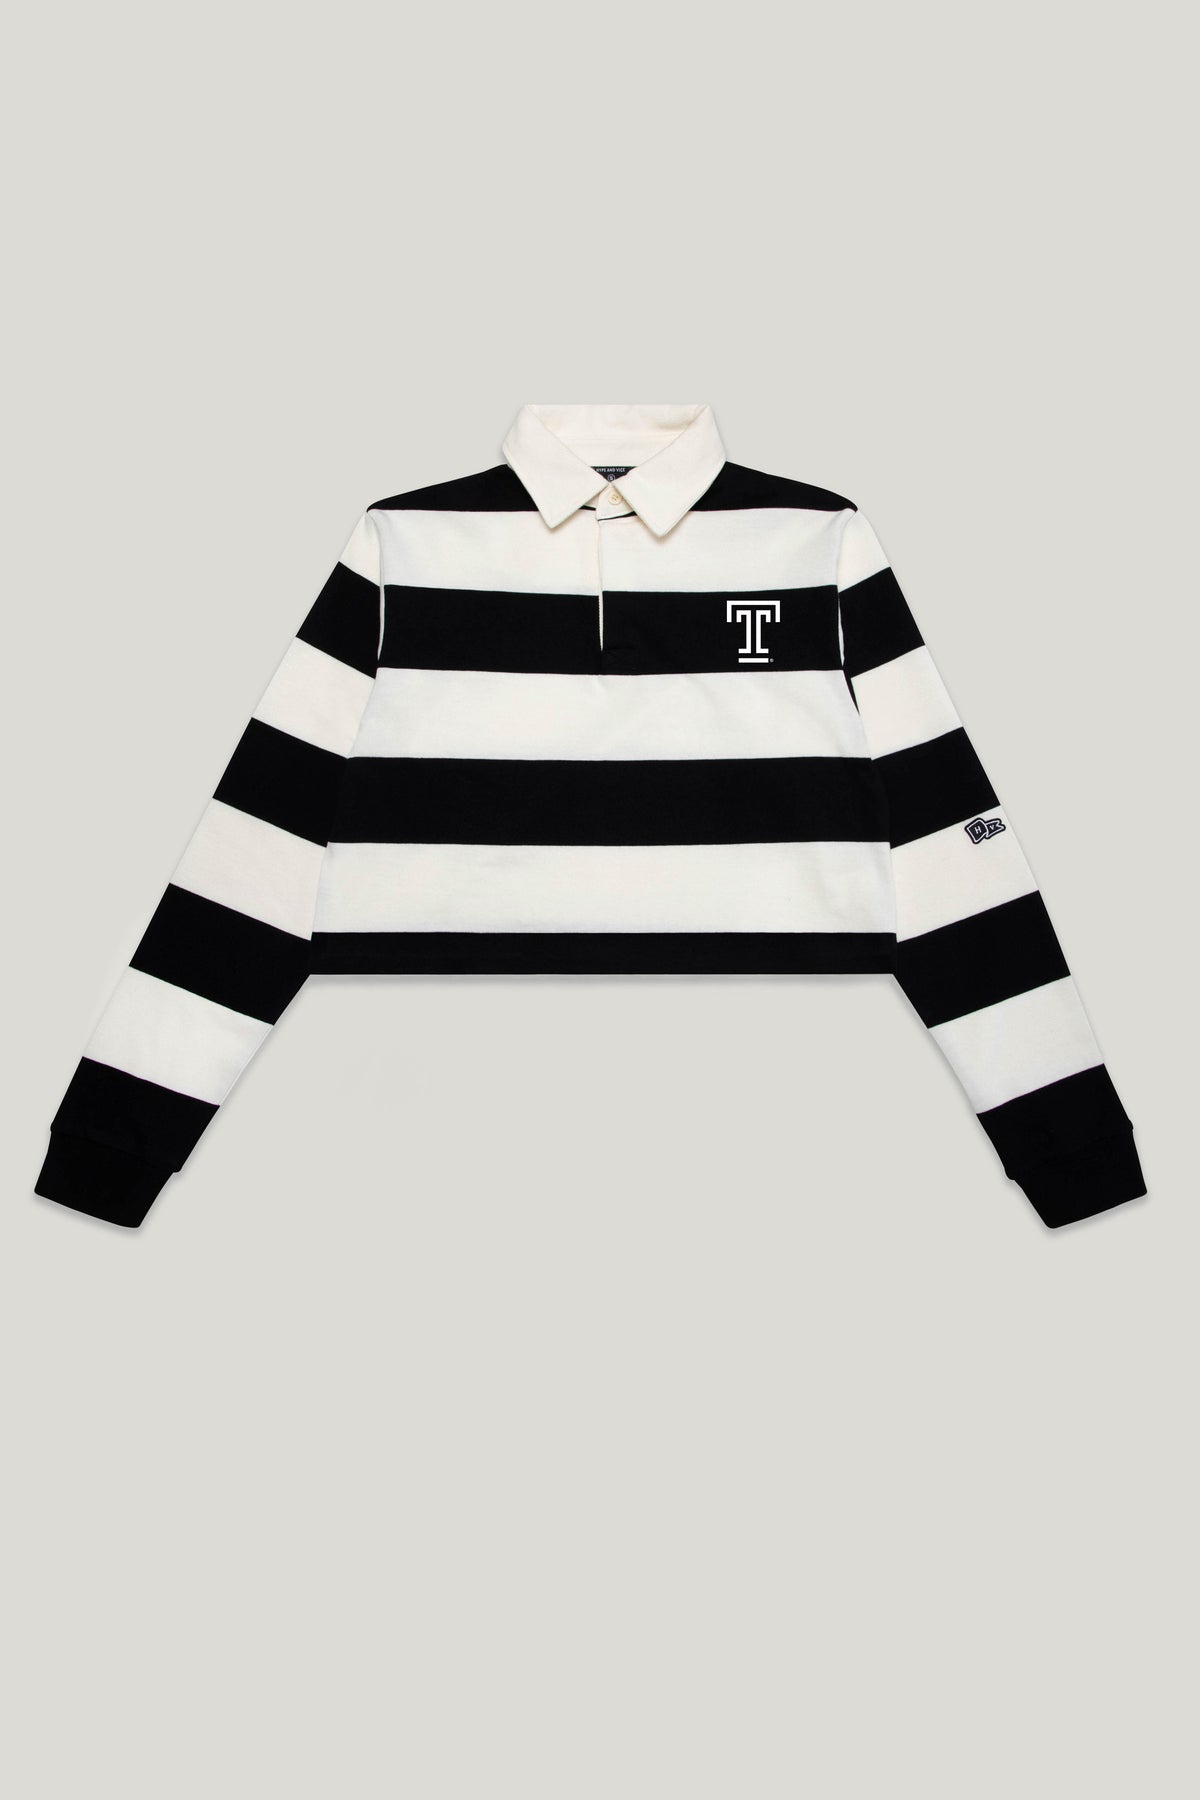 Temple University Rugby Top